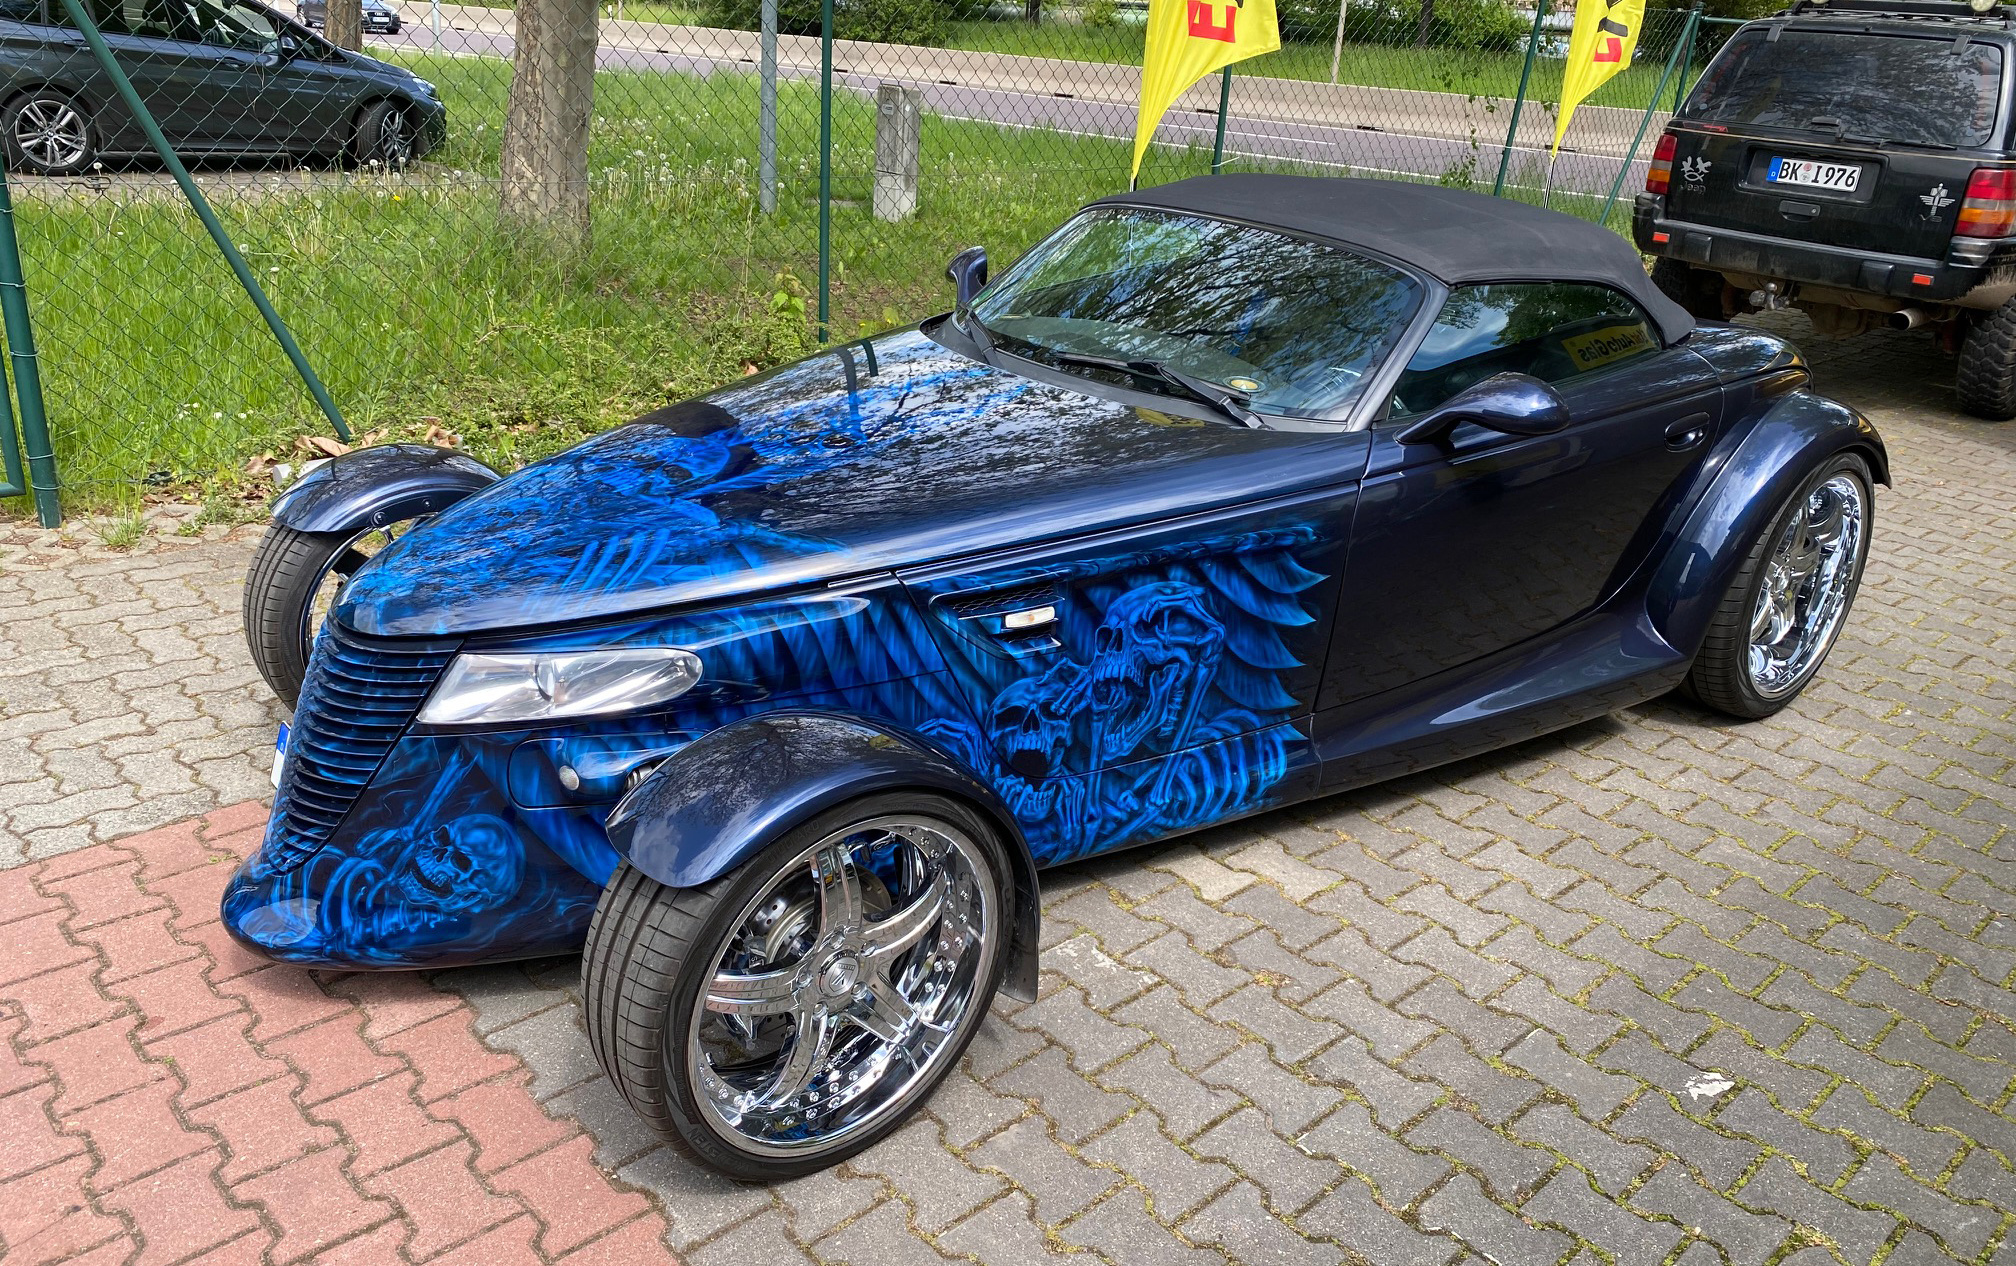 Plymouth Prowler, Flawless paint protection, Kfolia's perfect solution, Preserve the pristine, 2020x1270 HD Desktop